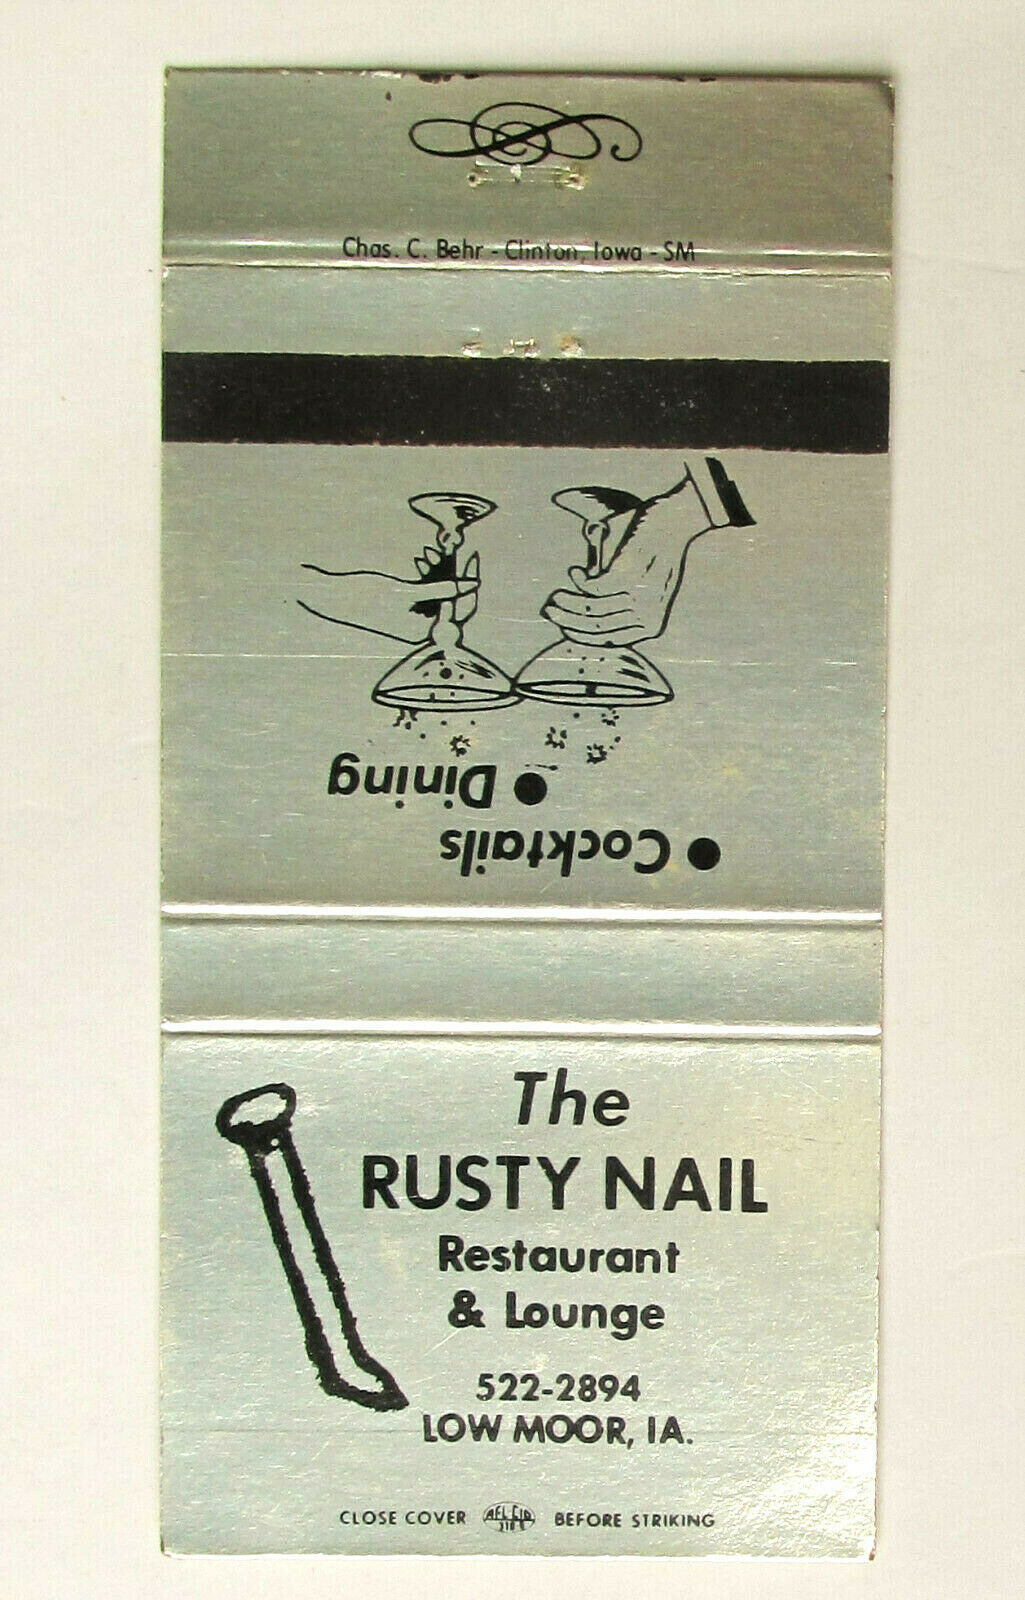 Primary image for The Rusty Nail Restaurant & Lounge - Low Moor, Iowa 30 Strike Matchbook Cover IA